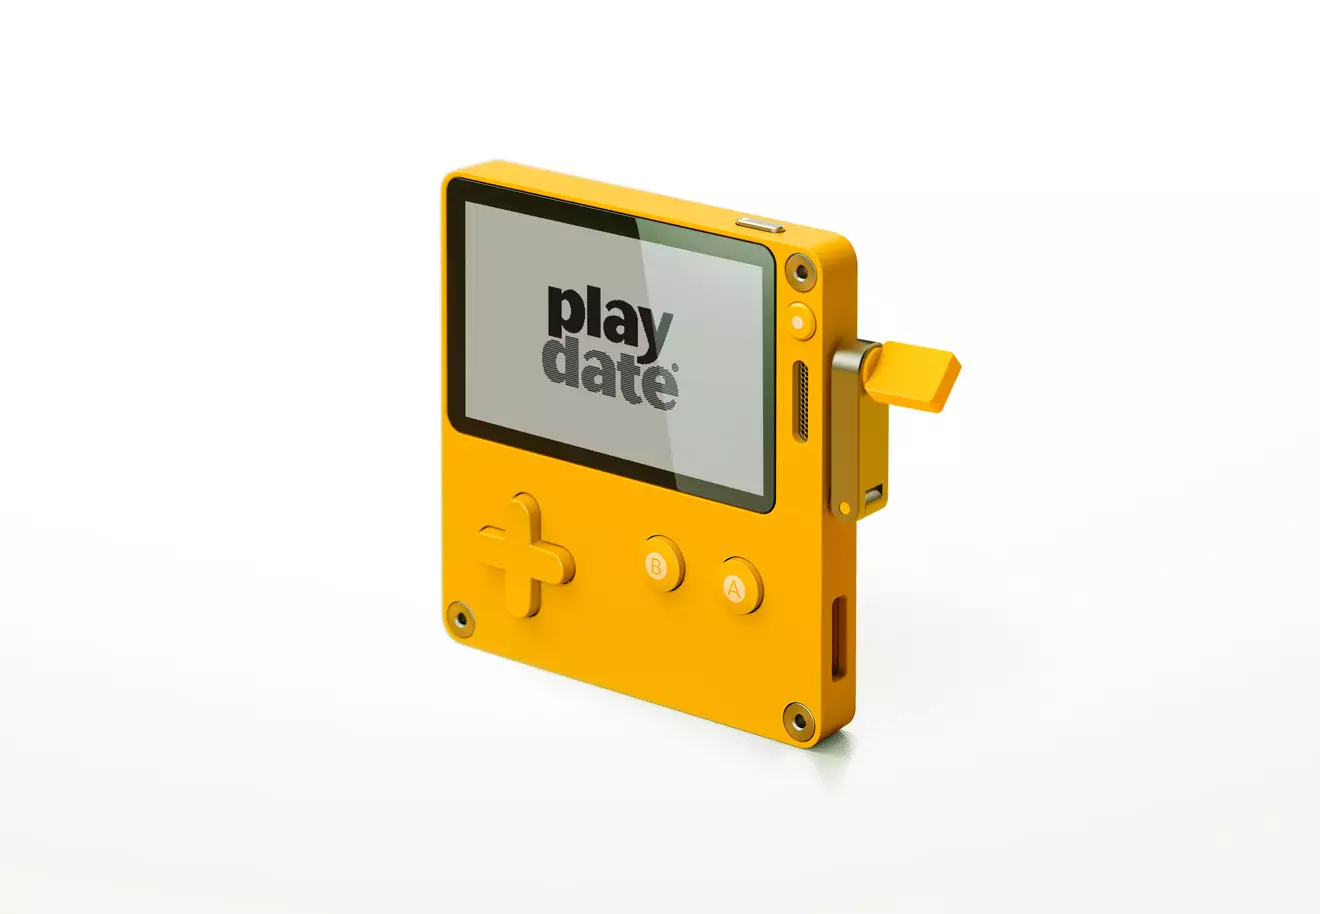 It's a gorgeously yellow little console